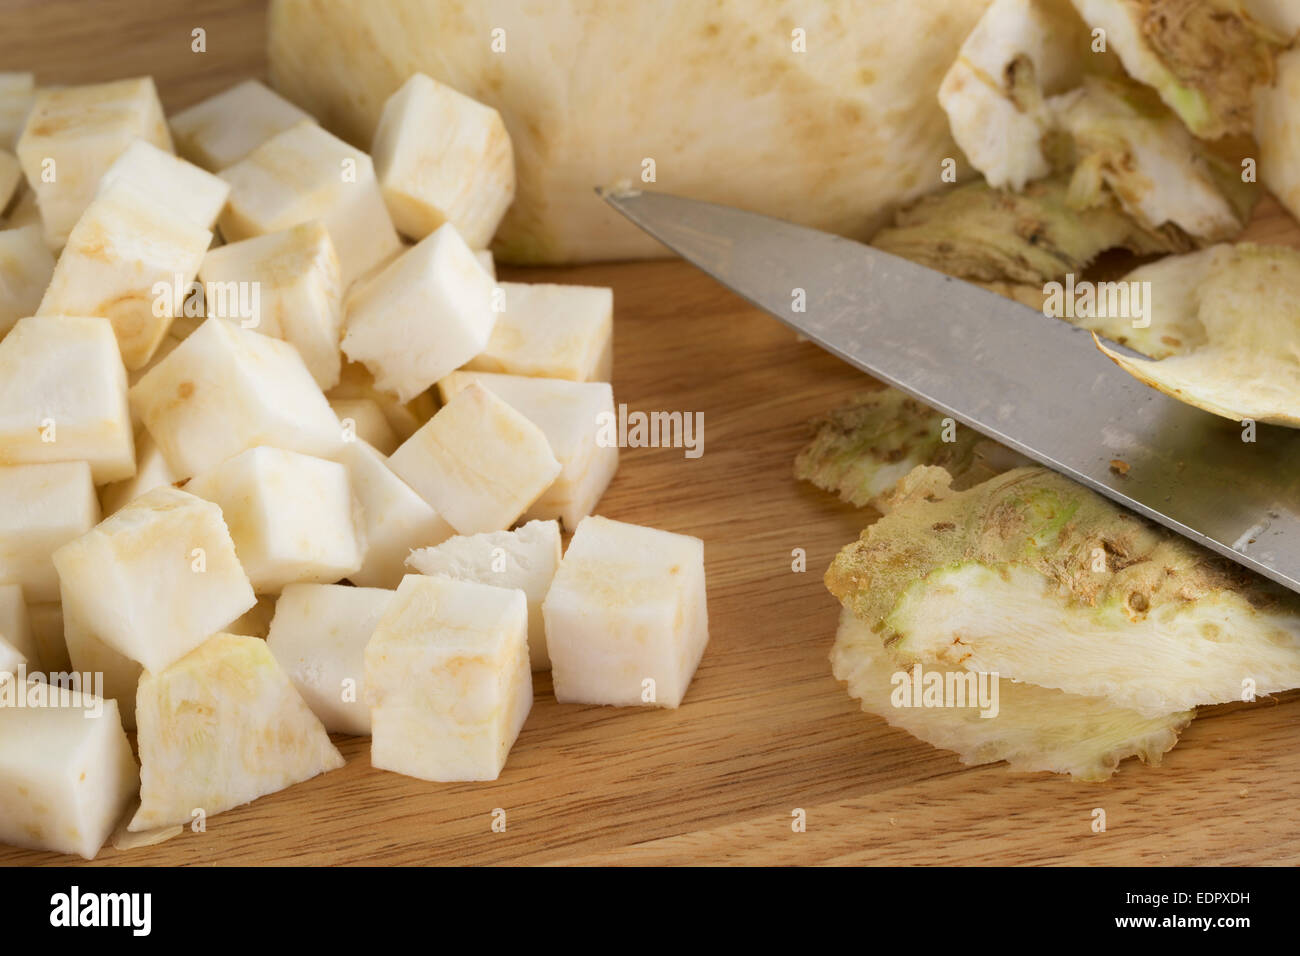 Celeriac cubes with peels and knife. Stock Photo